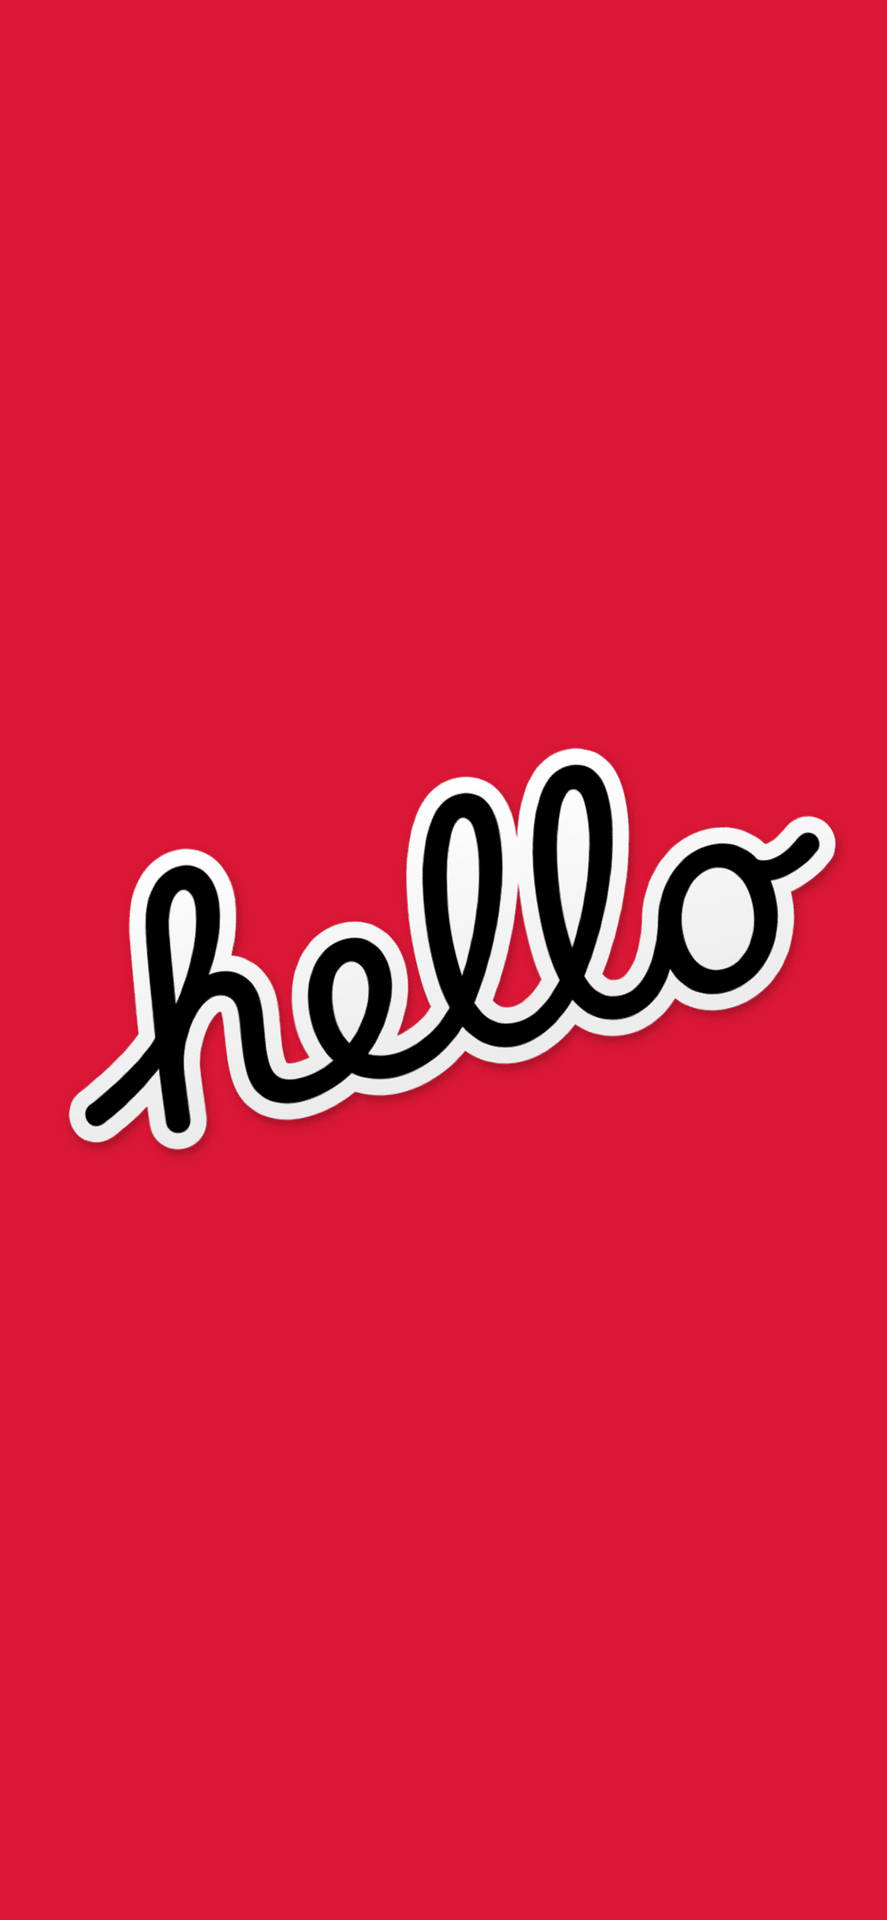 Hello Greeting On Red Background Wallpaper